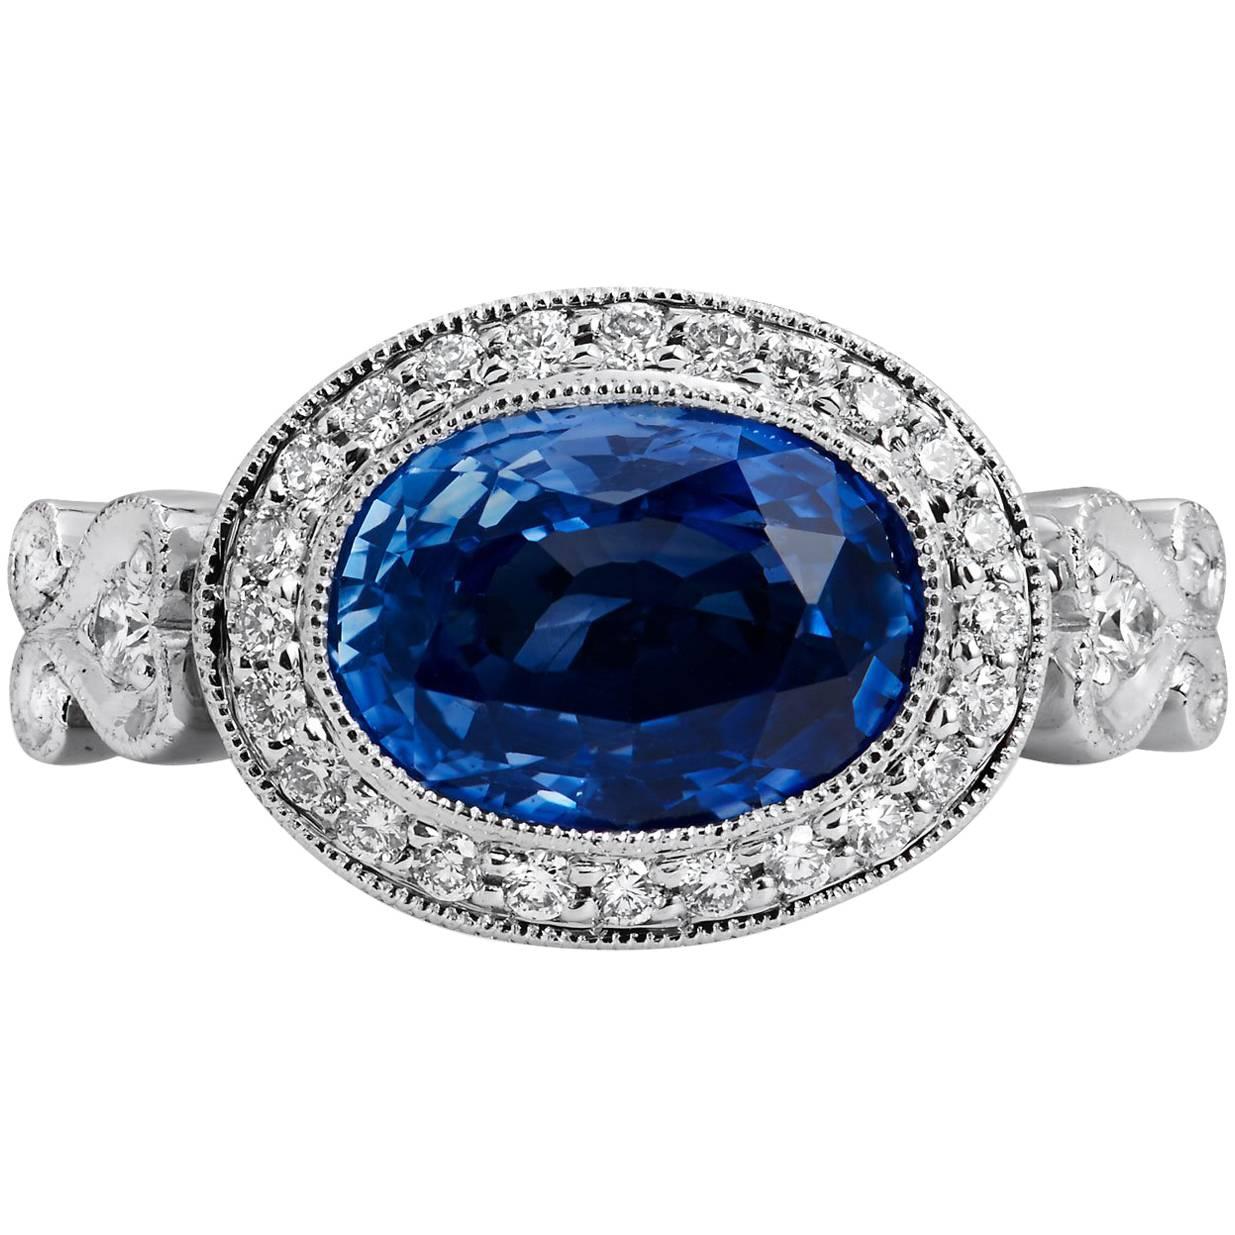 H & H 4.18 Carat Oval Sapphire and Diamond Pave Ring